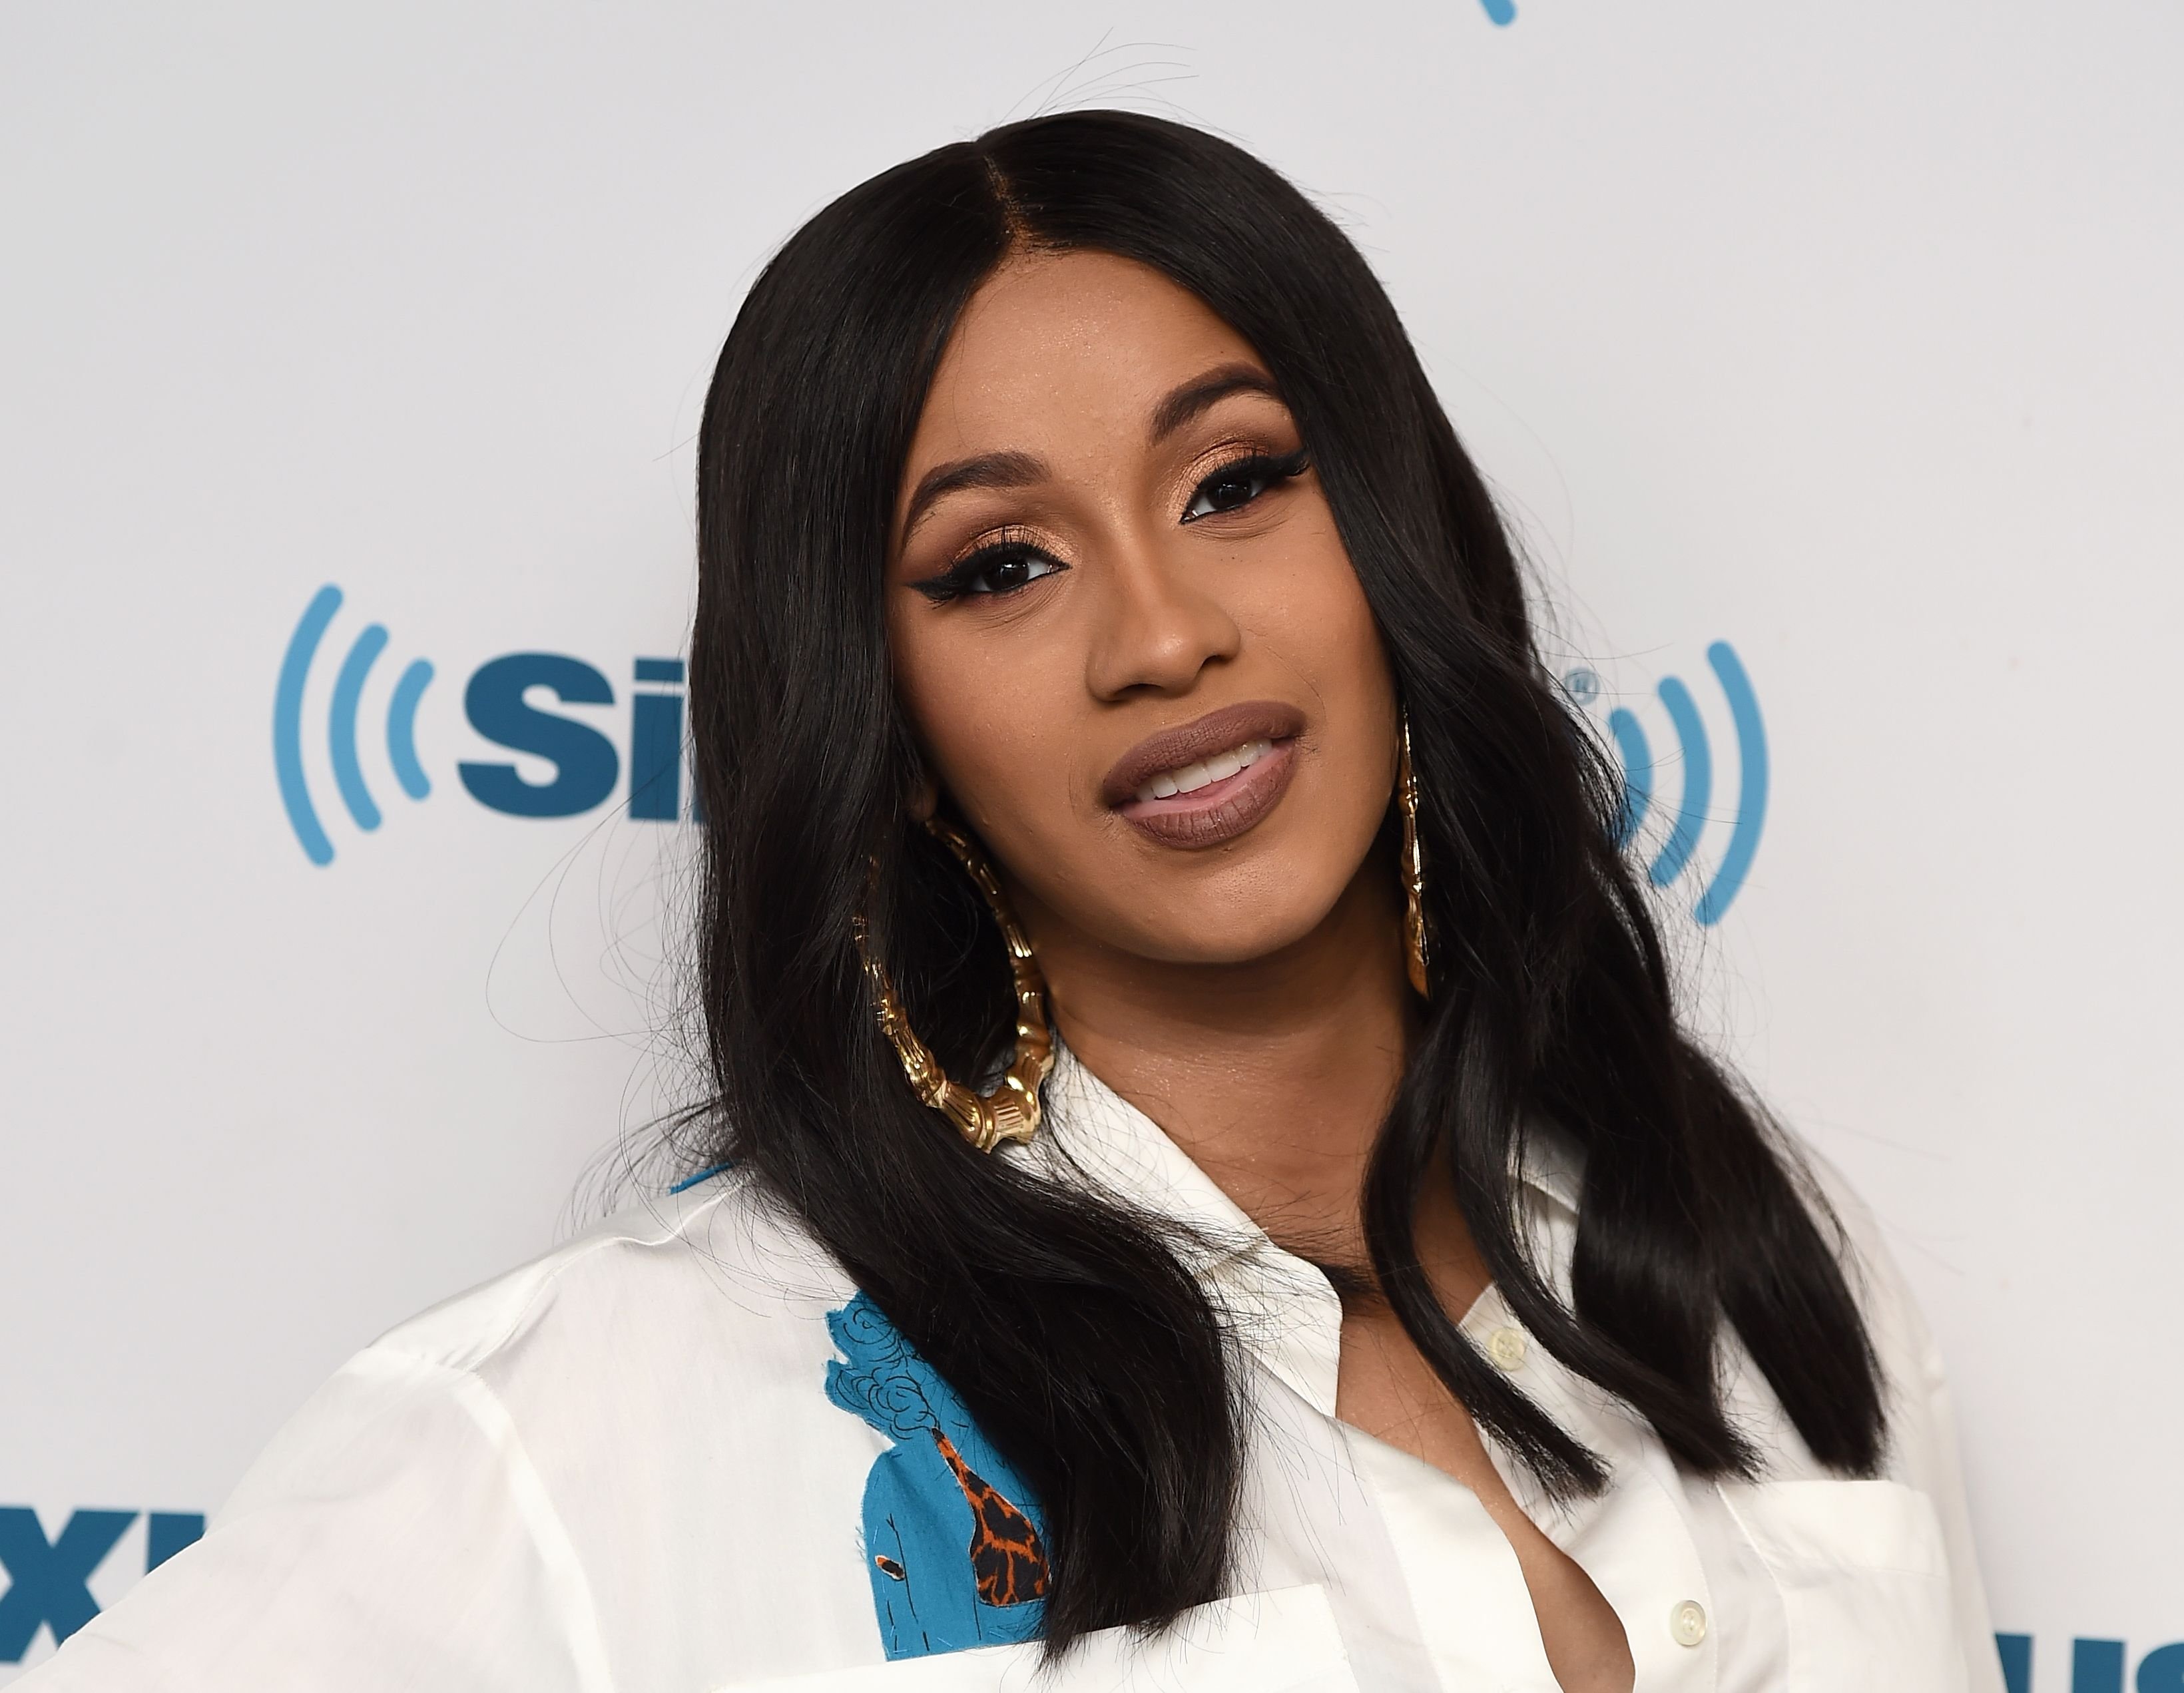 Rapper Cardi B visits the SiriusXM Studios on May 9, 2018 | Photo: Getty Images